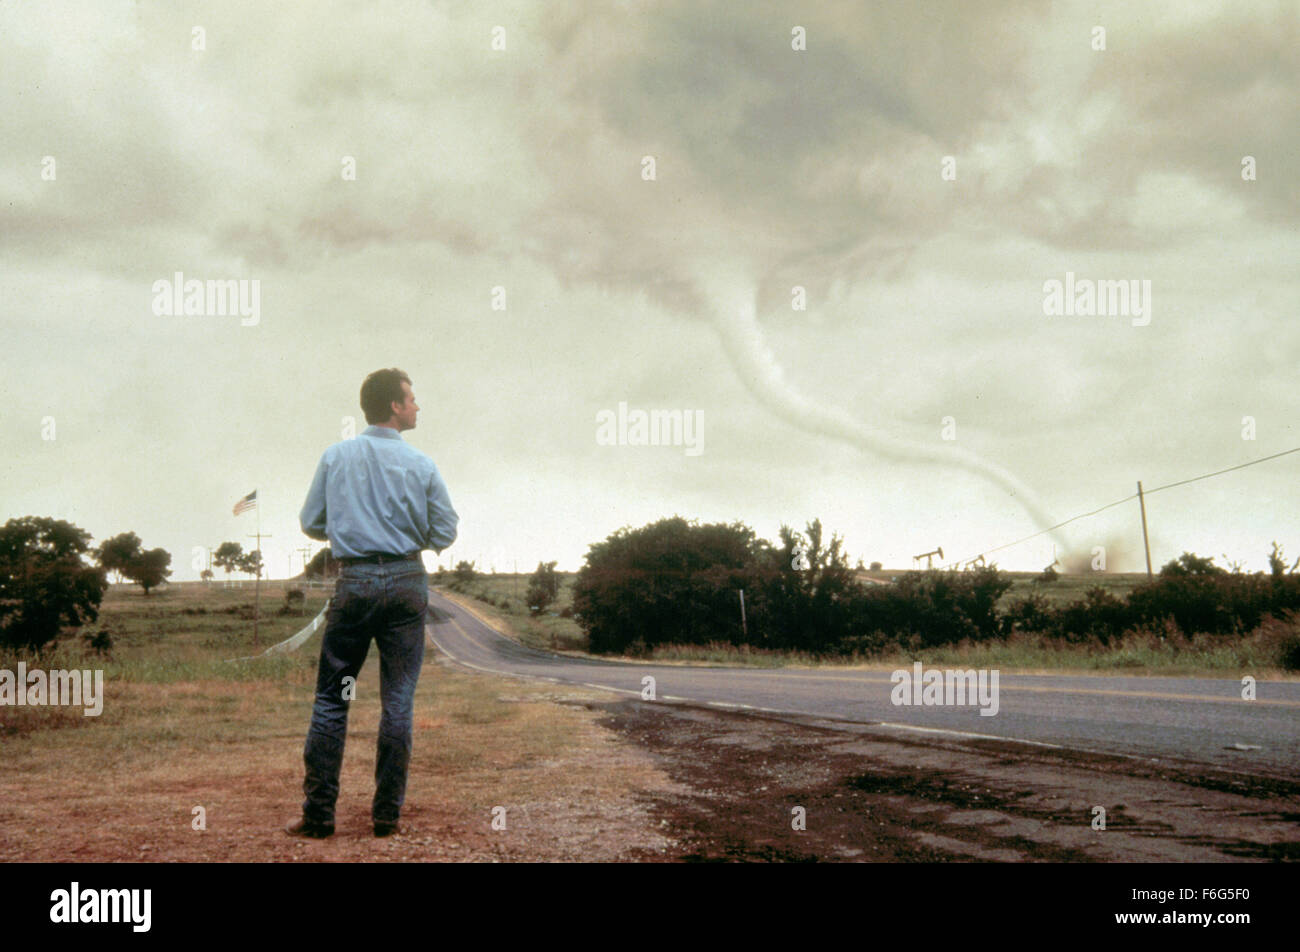 RELEASE DATE: 10 May 1996. MOVIE TITLE: Twister STUDIO: Universal Pictures. PLOT: A couple on the point of divorce keep meeting each other because both are researchers who chase tornadoes. PICTURED: BILL PAXTON as Bill Harding. Stock Photo